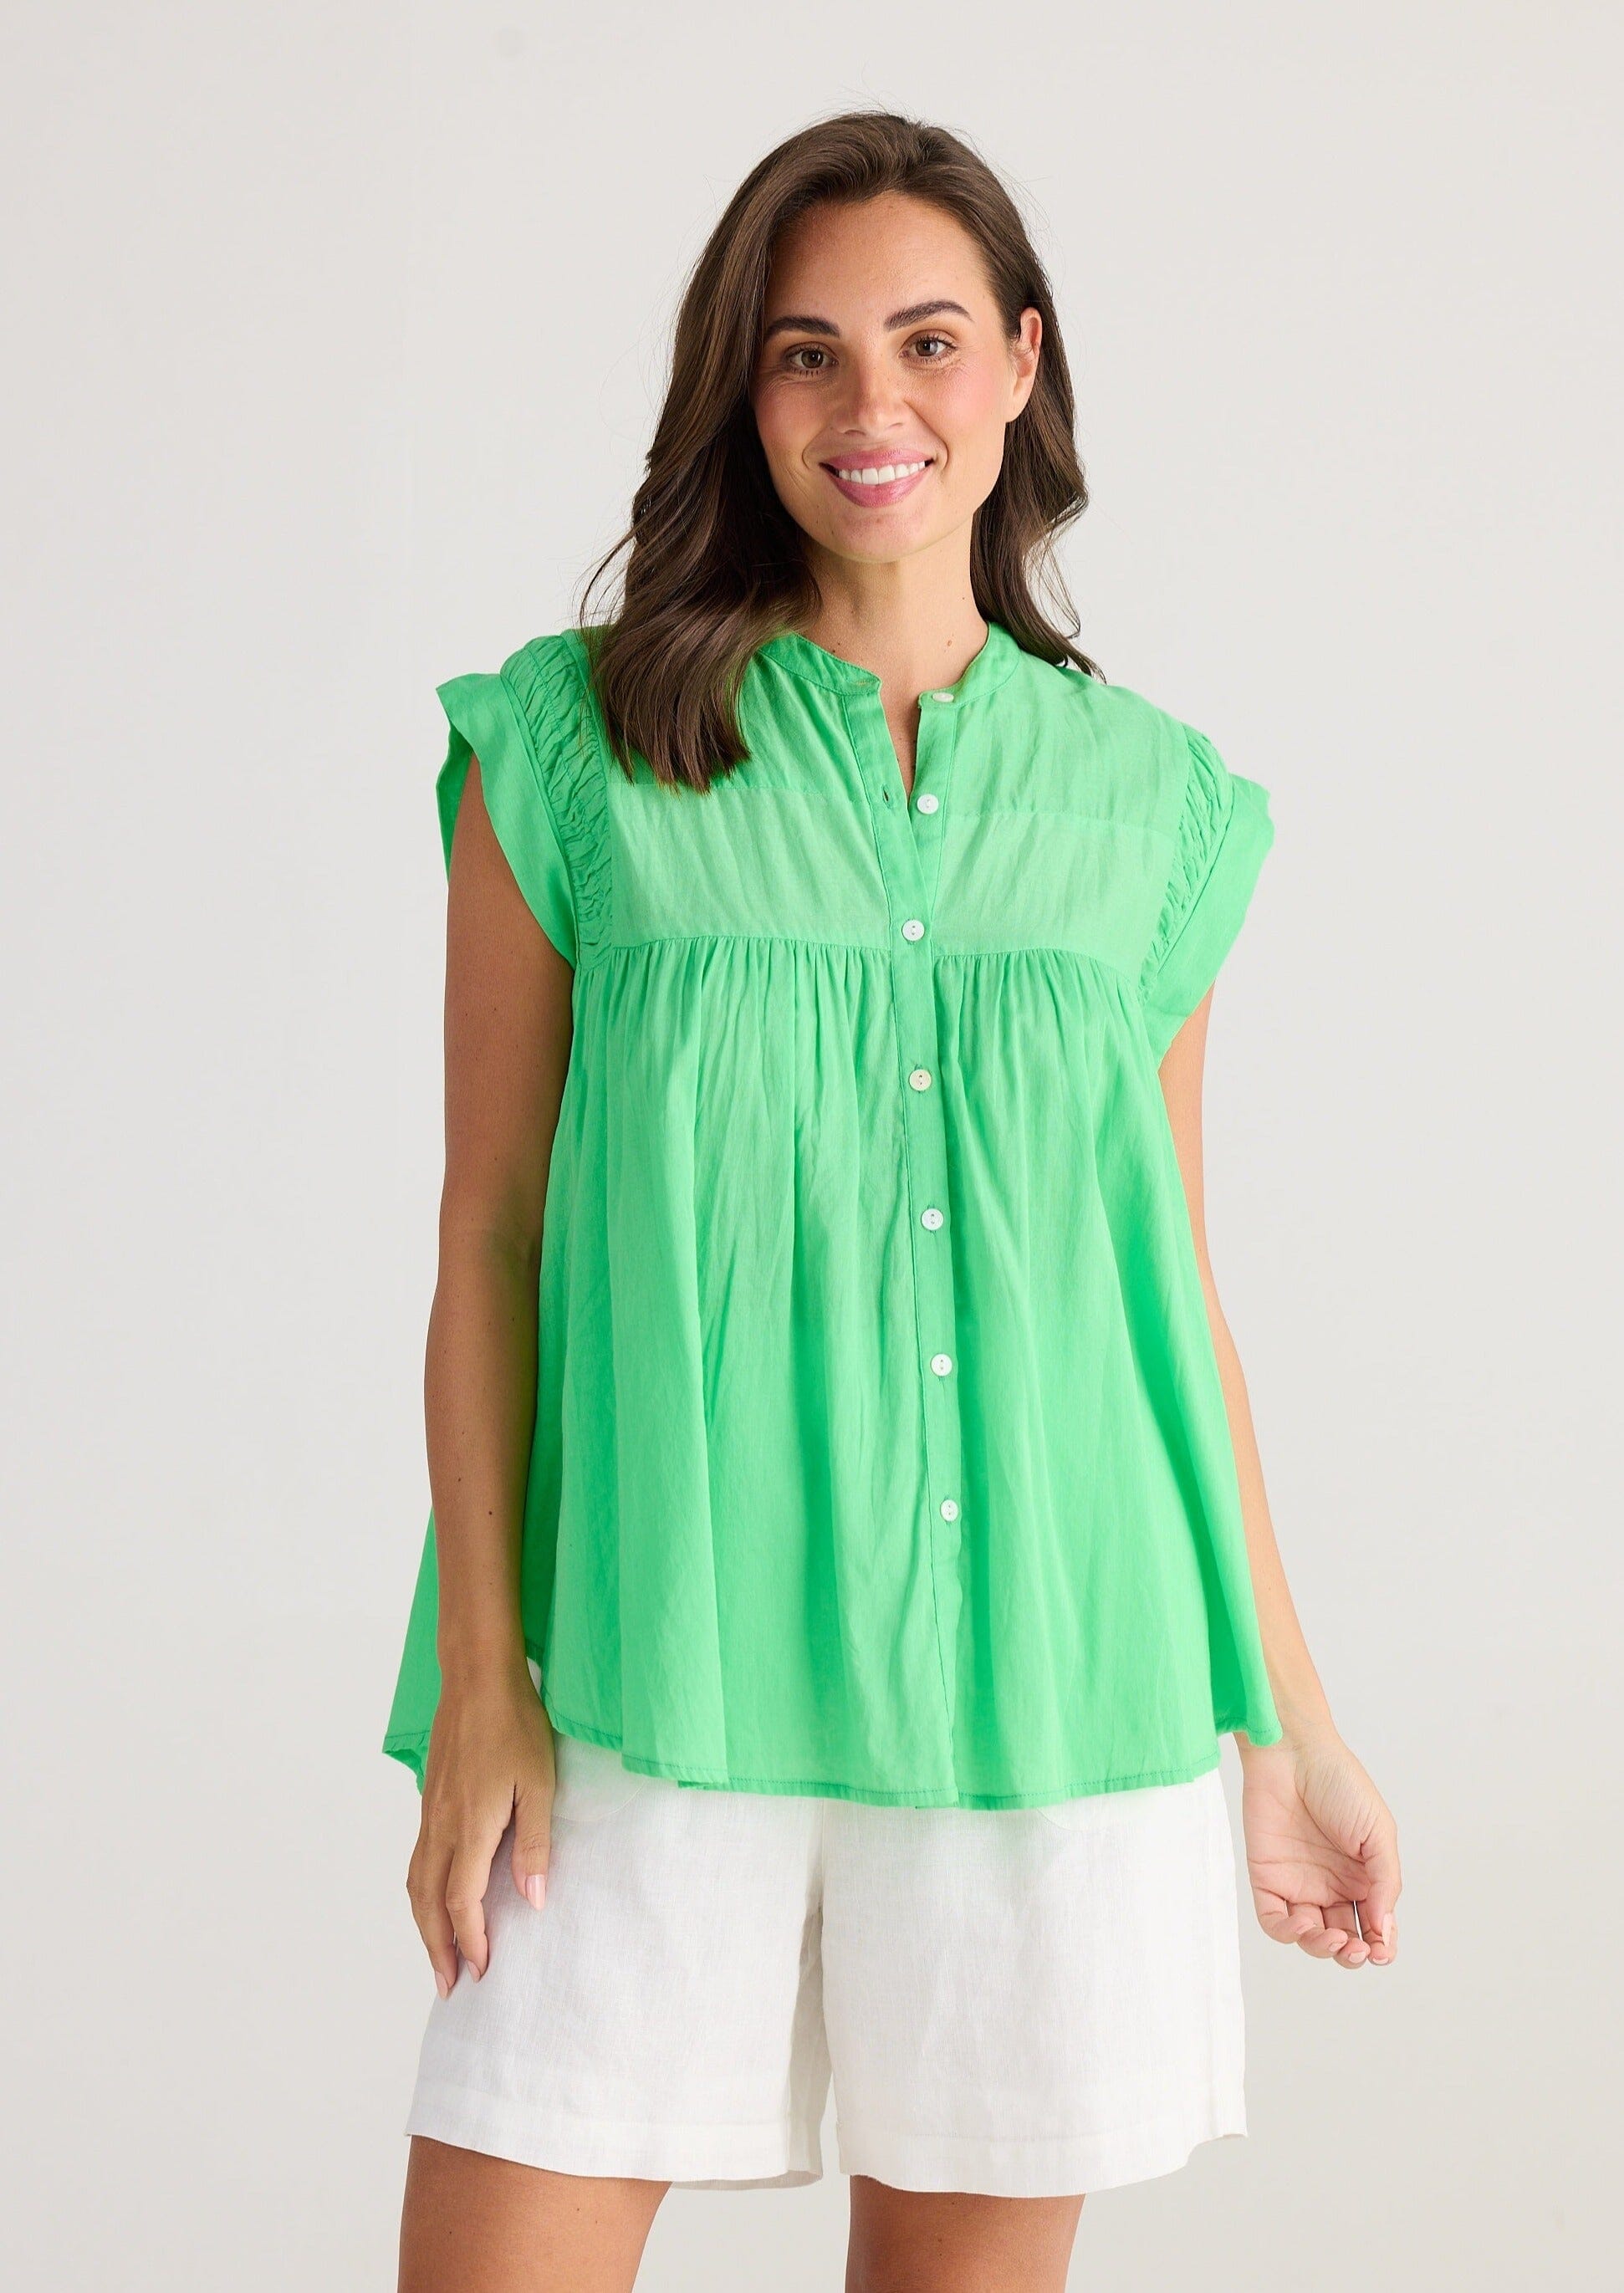 Clementine Top-Apple Top Holiday 